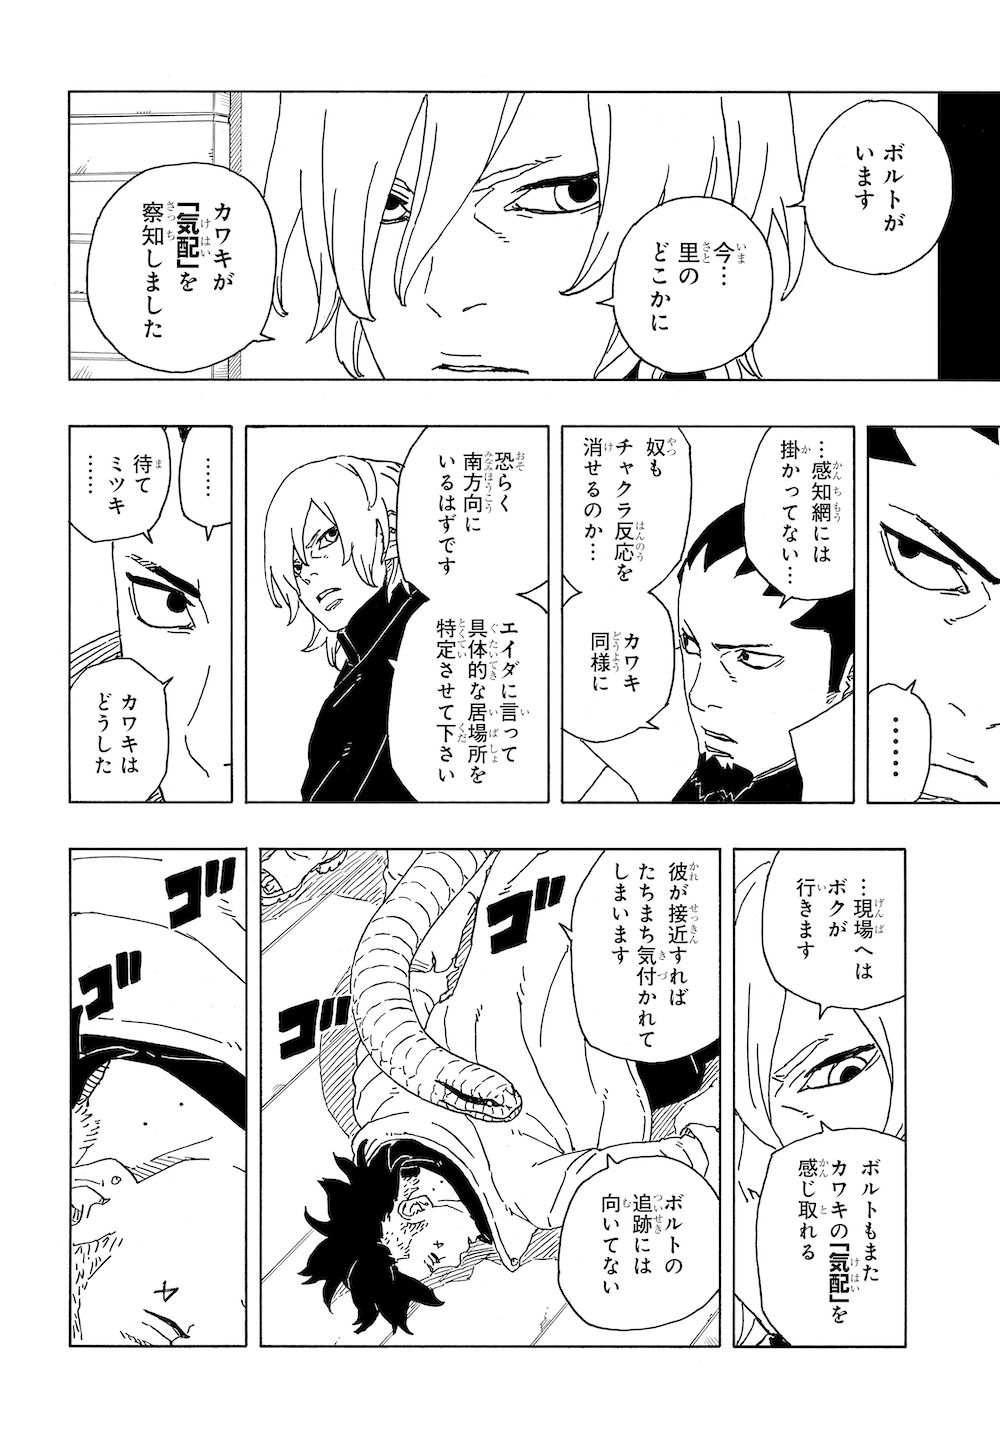 It's Almost Here!] Take a Peek at a Page from Chapter 5 of Boruto